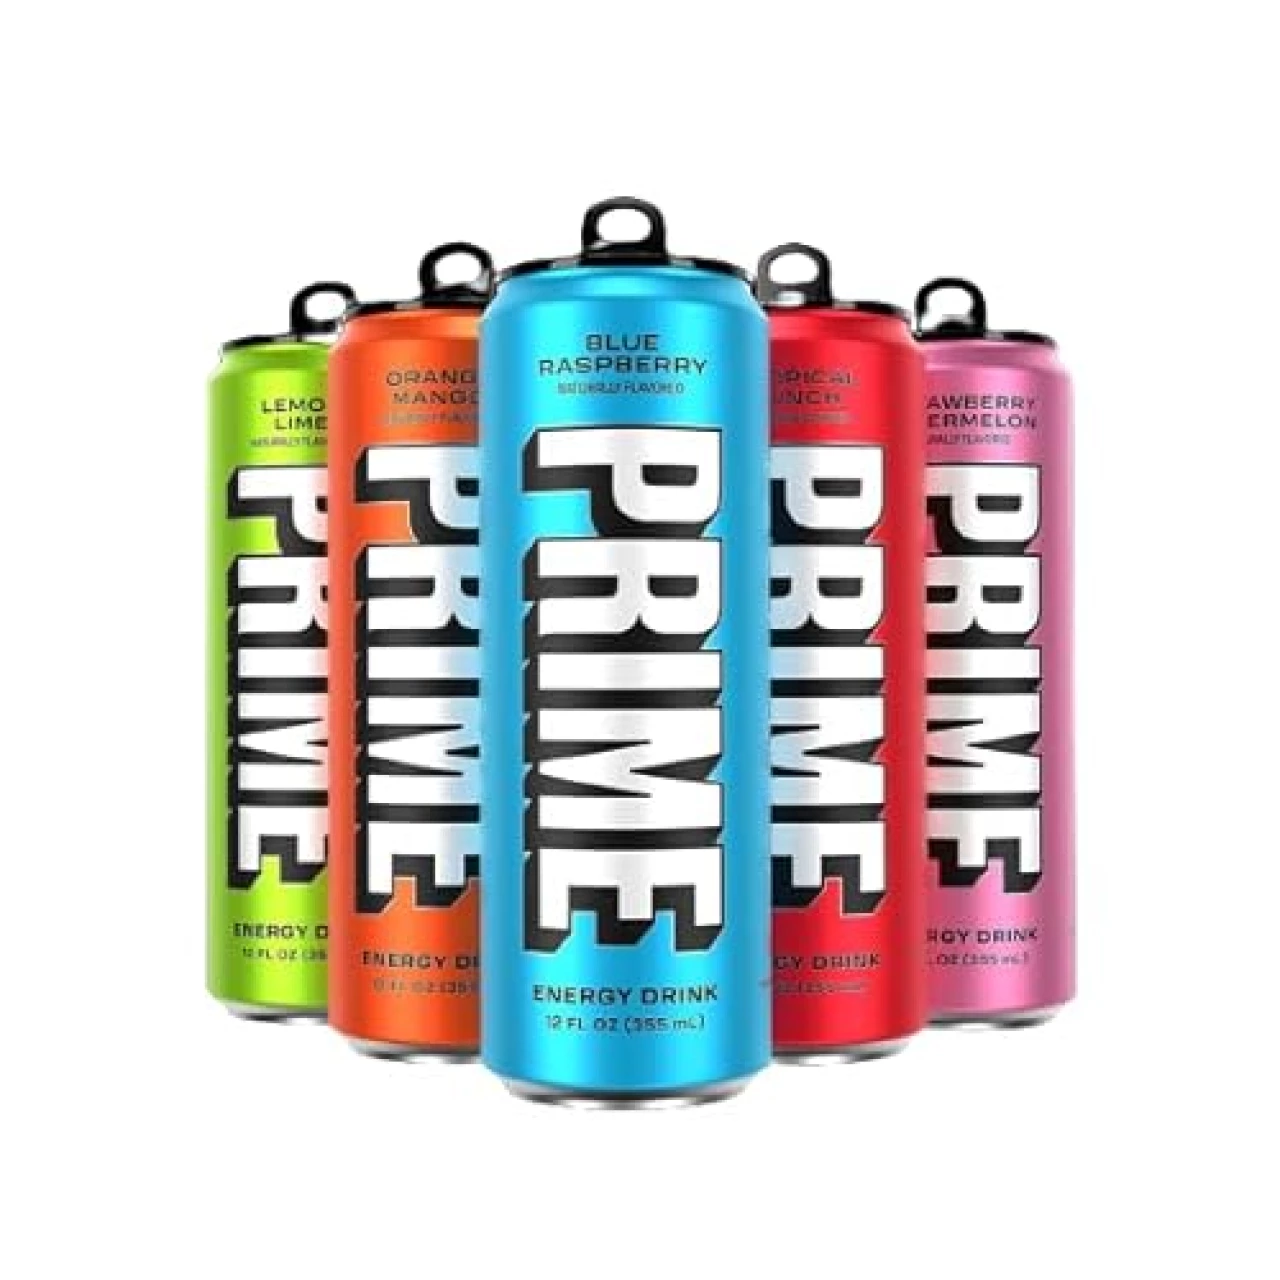 Prime Hydration Energy Drink Cans 5 Flavor Variety Pack